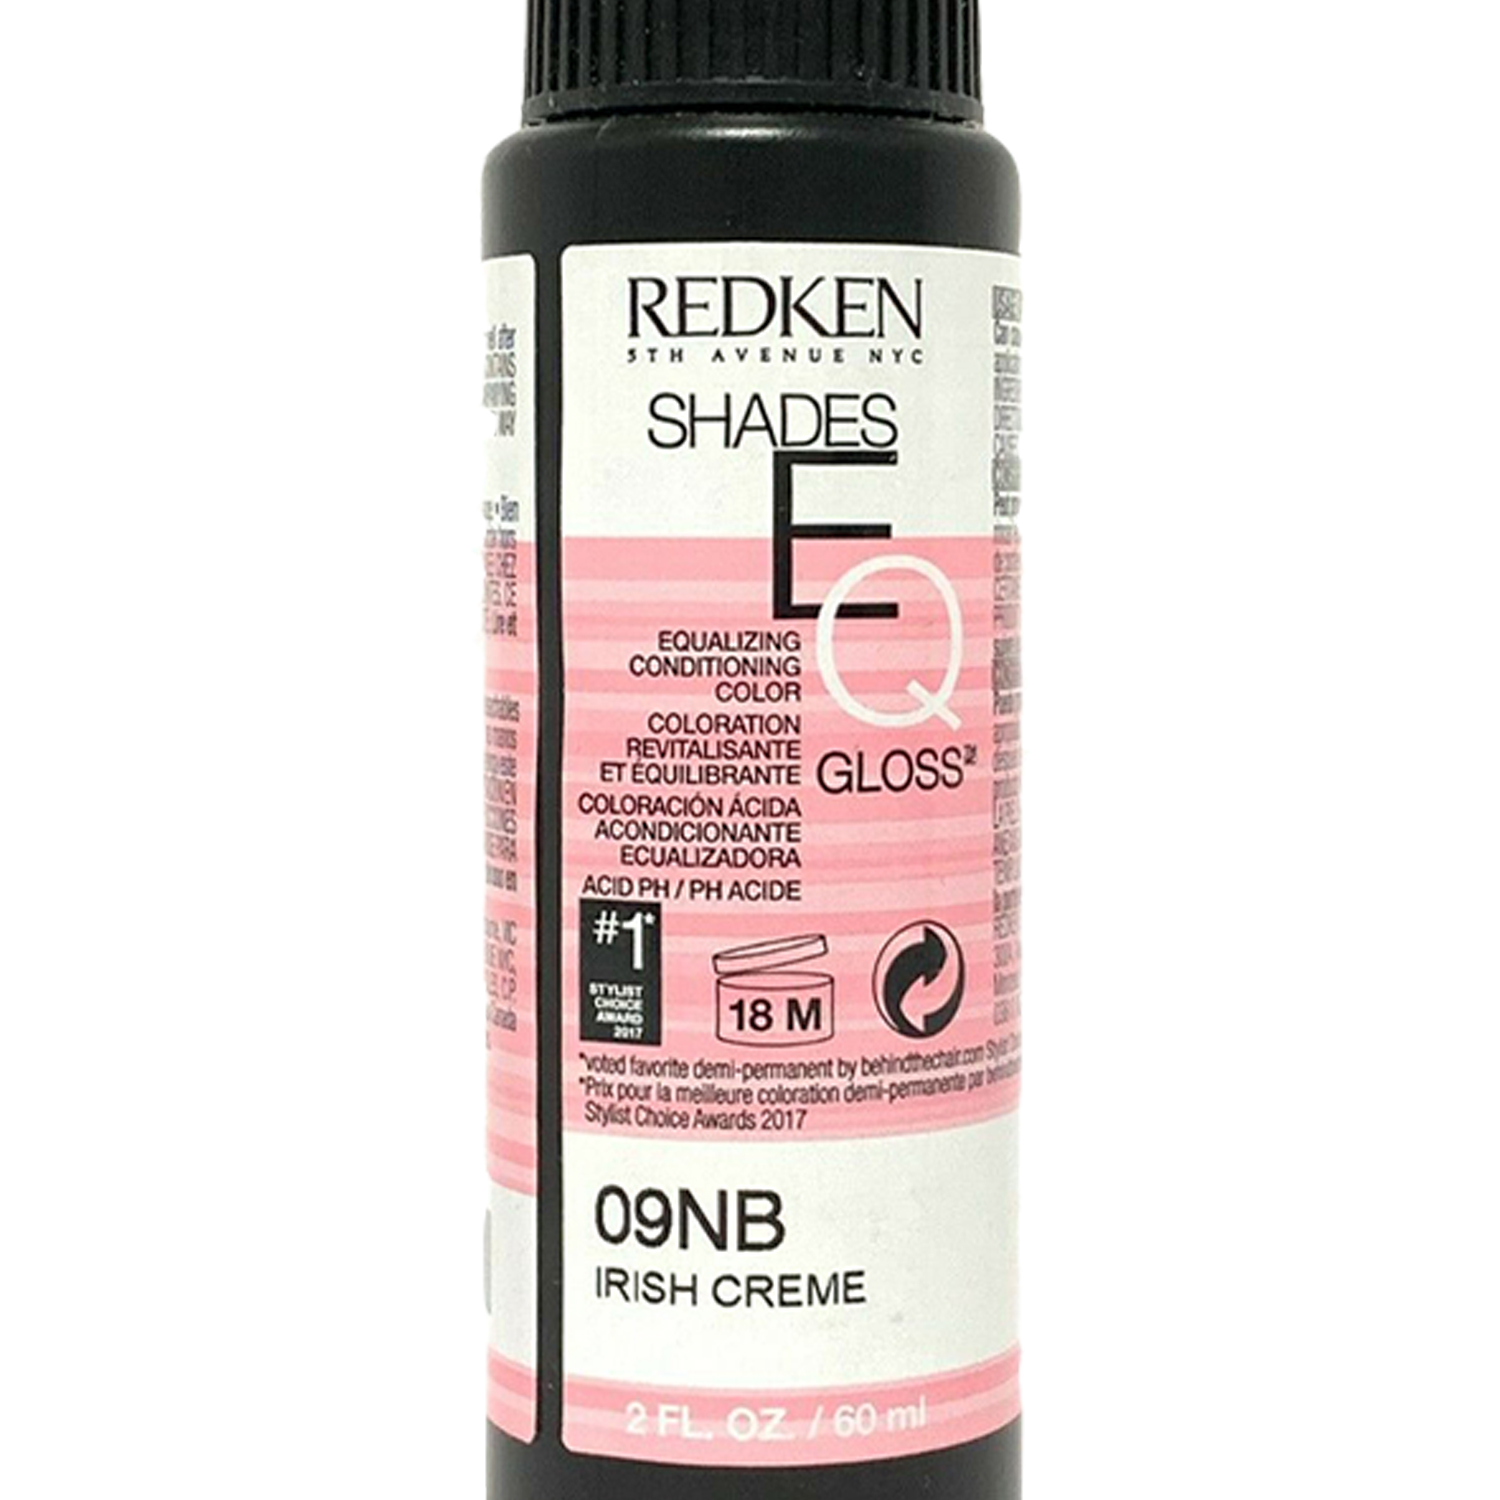 Shades EQ Color Gloss 09NB - Irish Creme by Redken for Women - 2 oz Hair Color - image 5 of 5